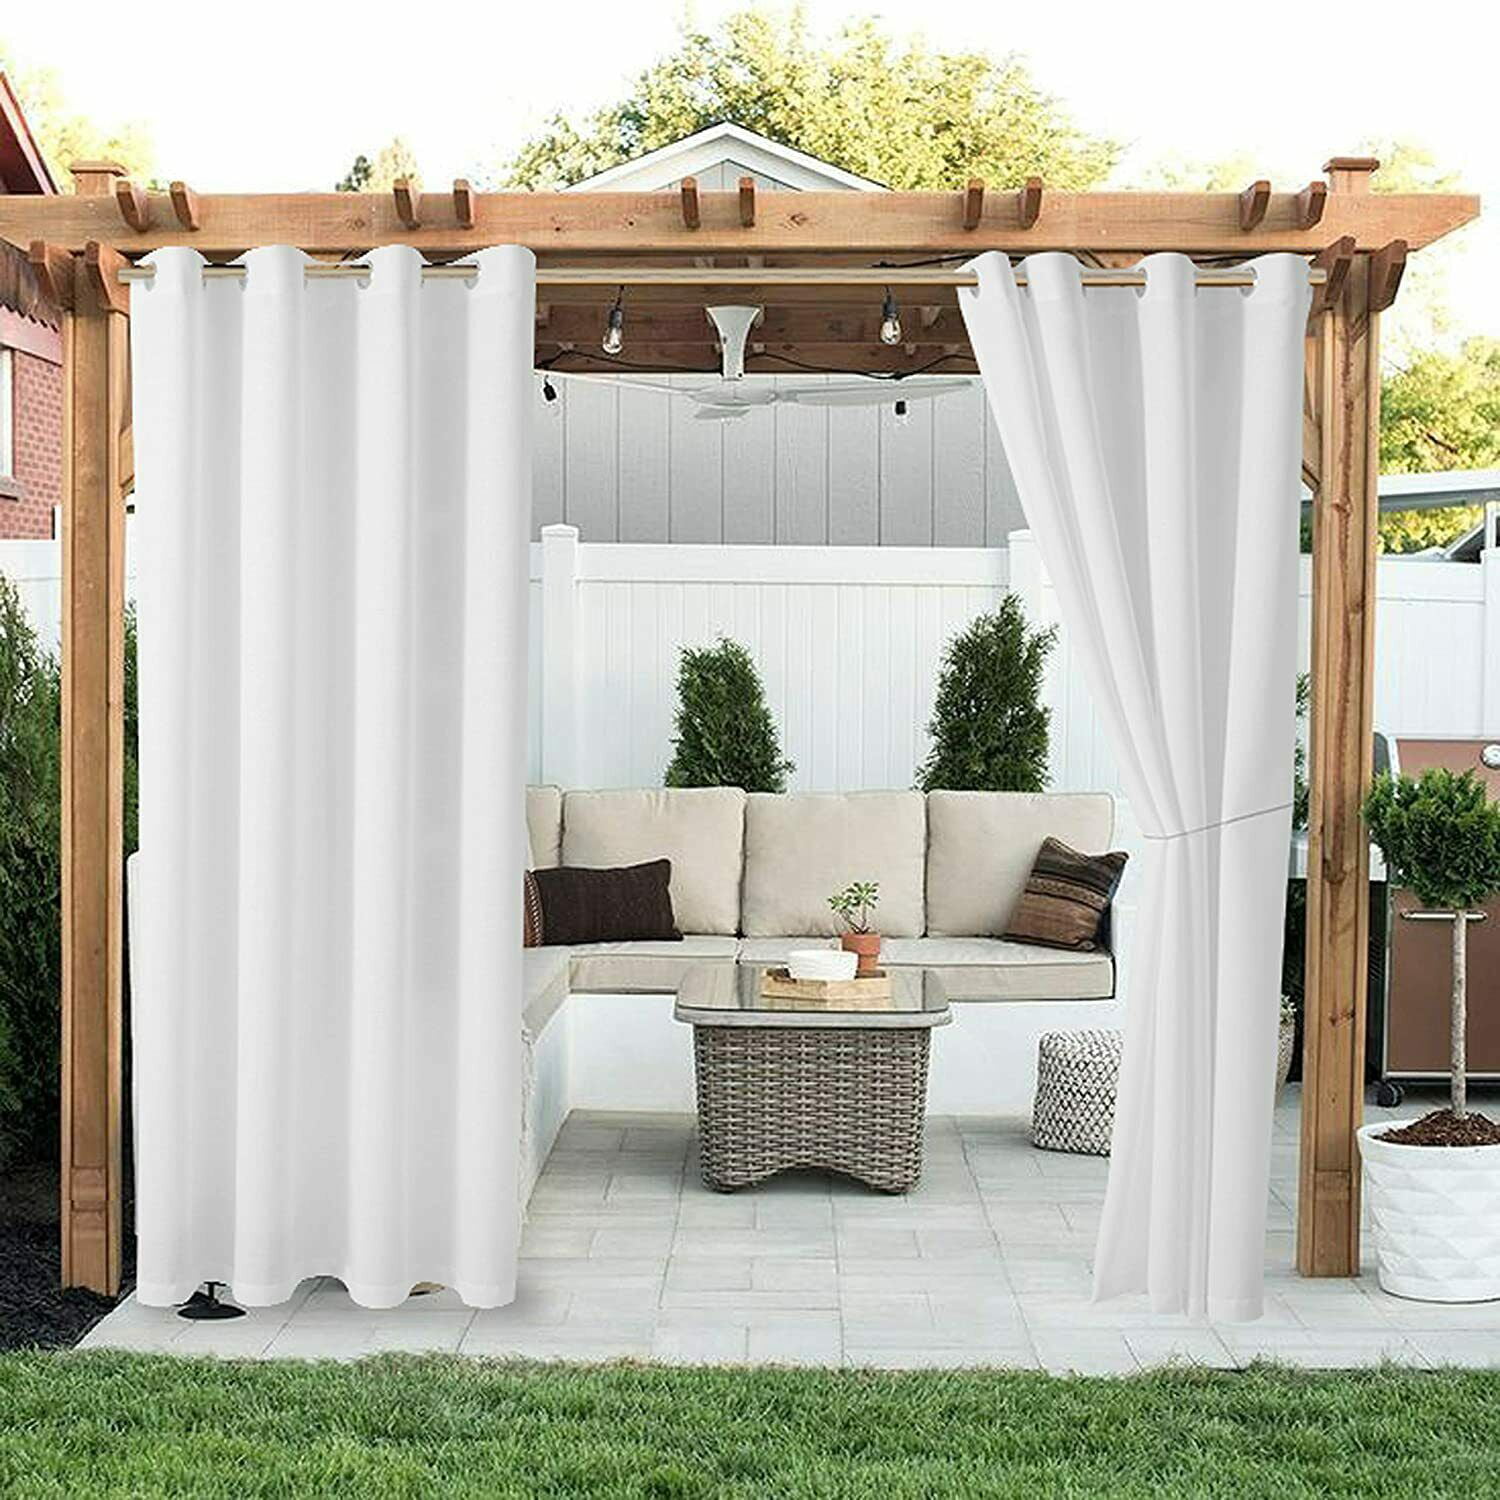 TOPCHANCES Outdoor Patio Curtains - Heavy Weighted Porch Waterproof Curtains  Outside Shade for Farmhouse Cabin Pergola Cabana Corridor Terrace, White ,  2 Panels, 52 x 108 inches Long (2 Pack) - Walmart.com